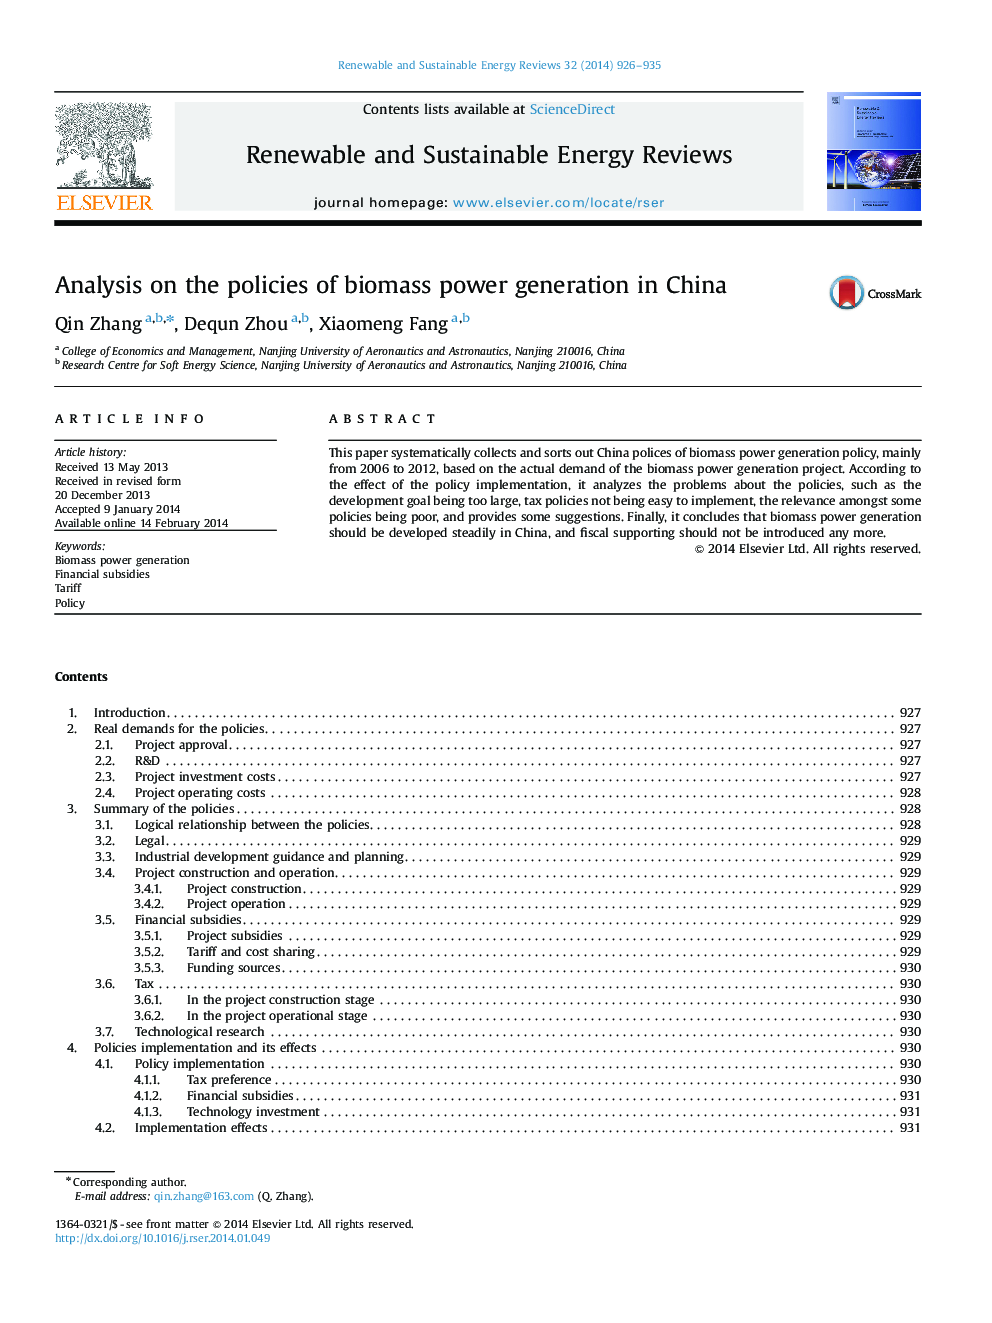 Analysis on the policies of biomass power generation in China